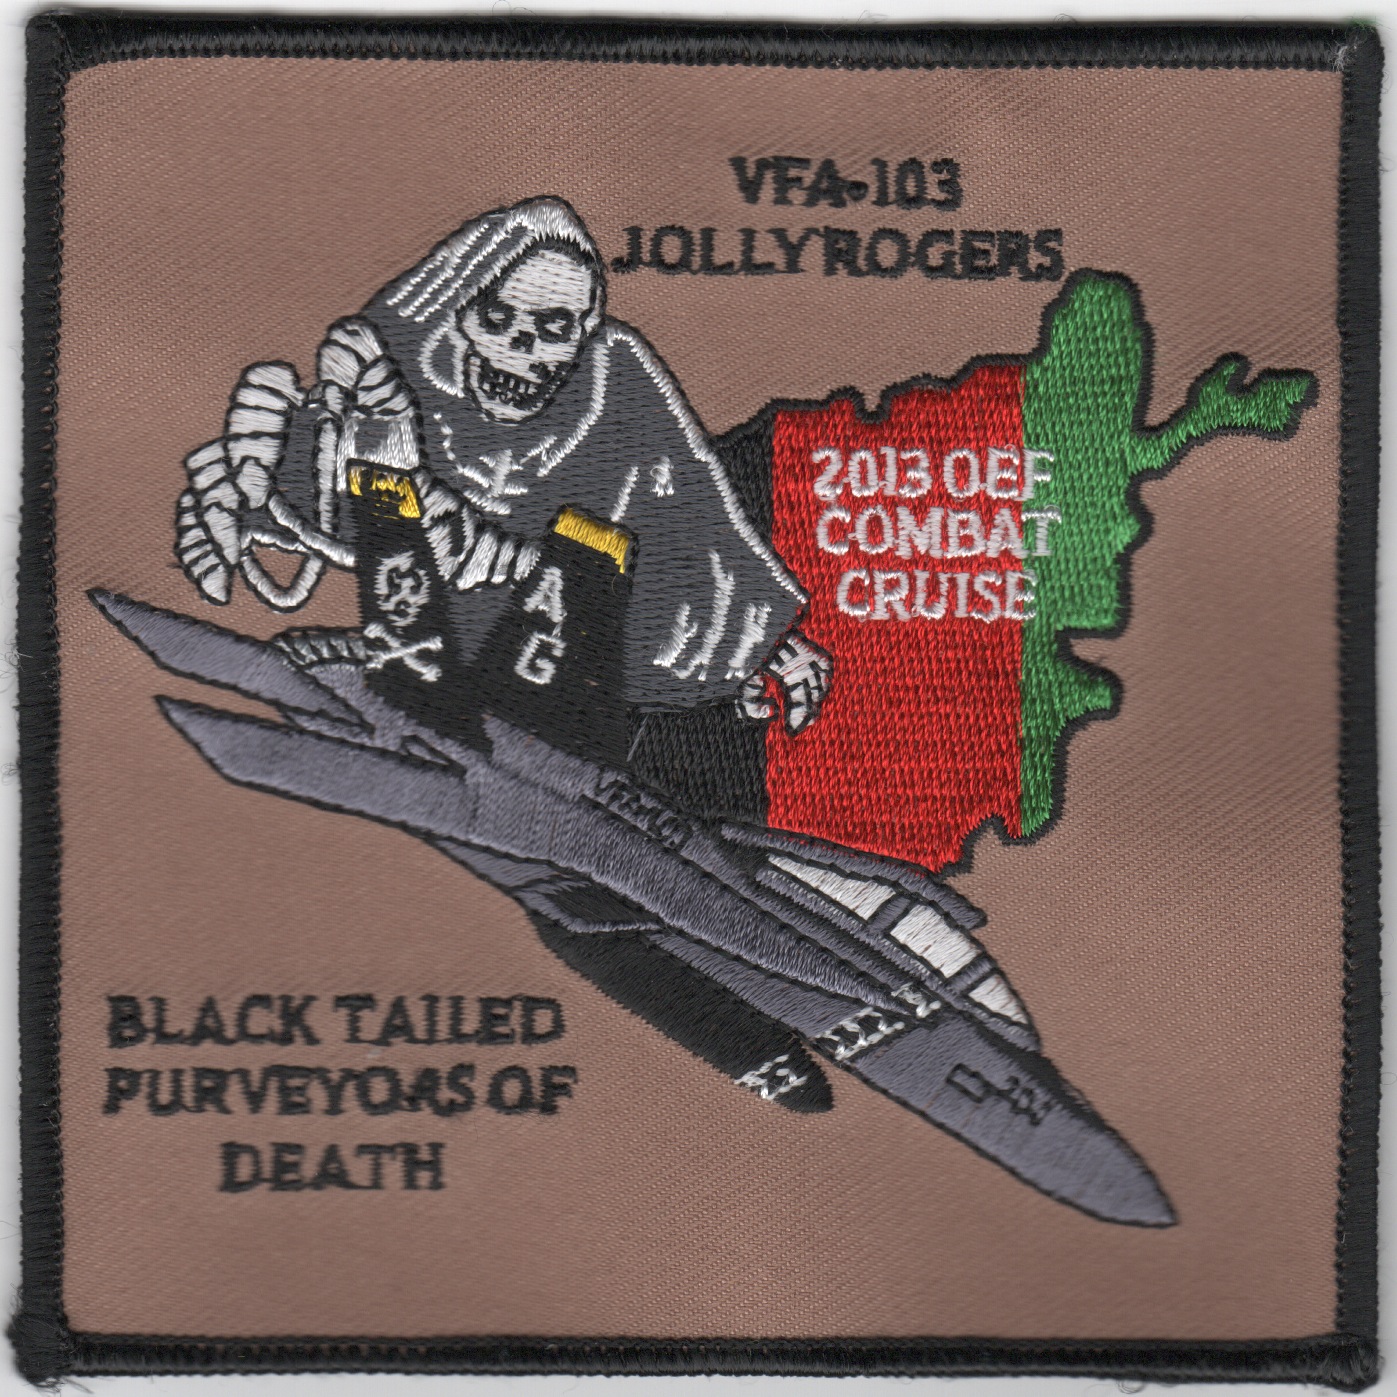 VFA-103 2013 'Purveyor of Death' Cruise Patch